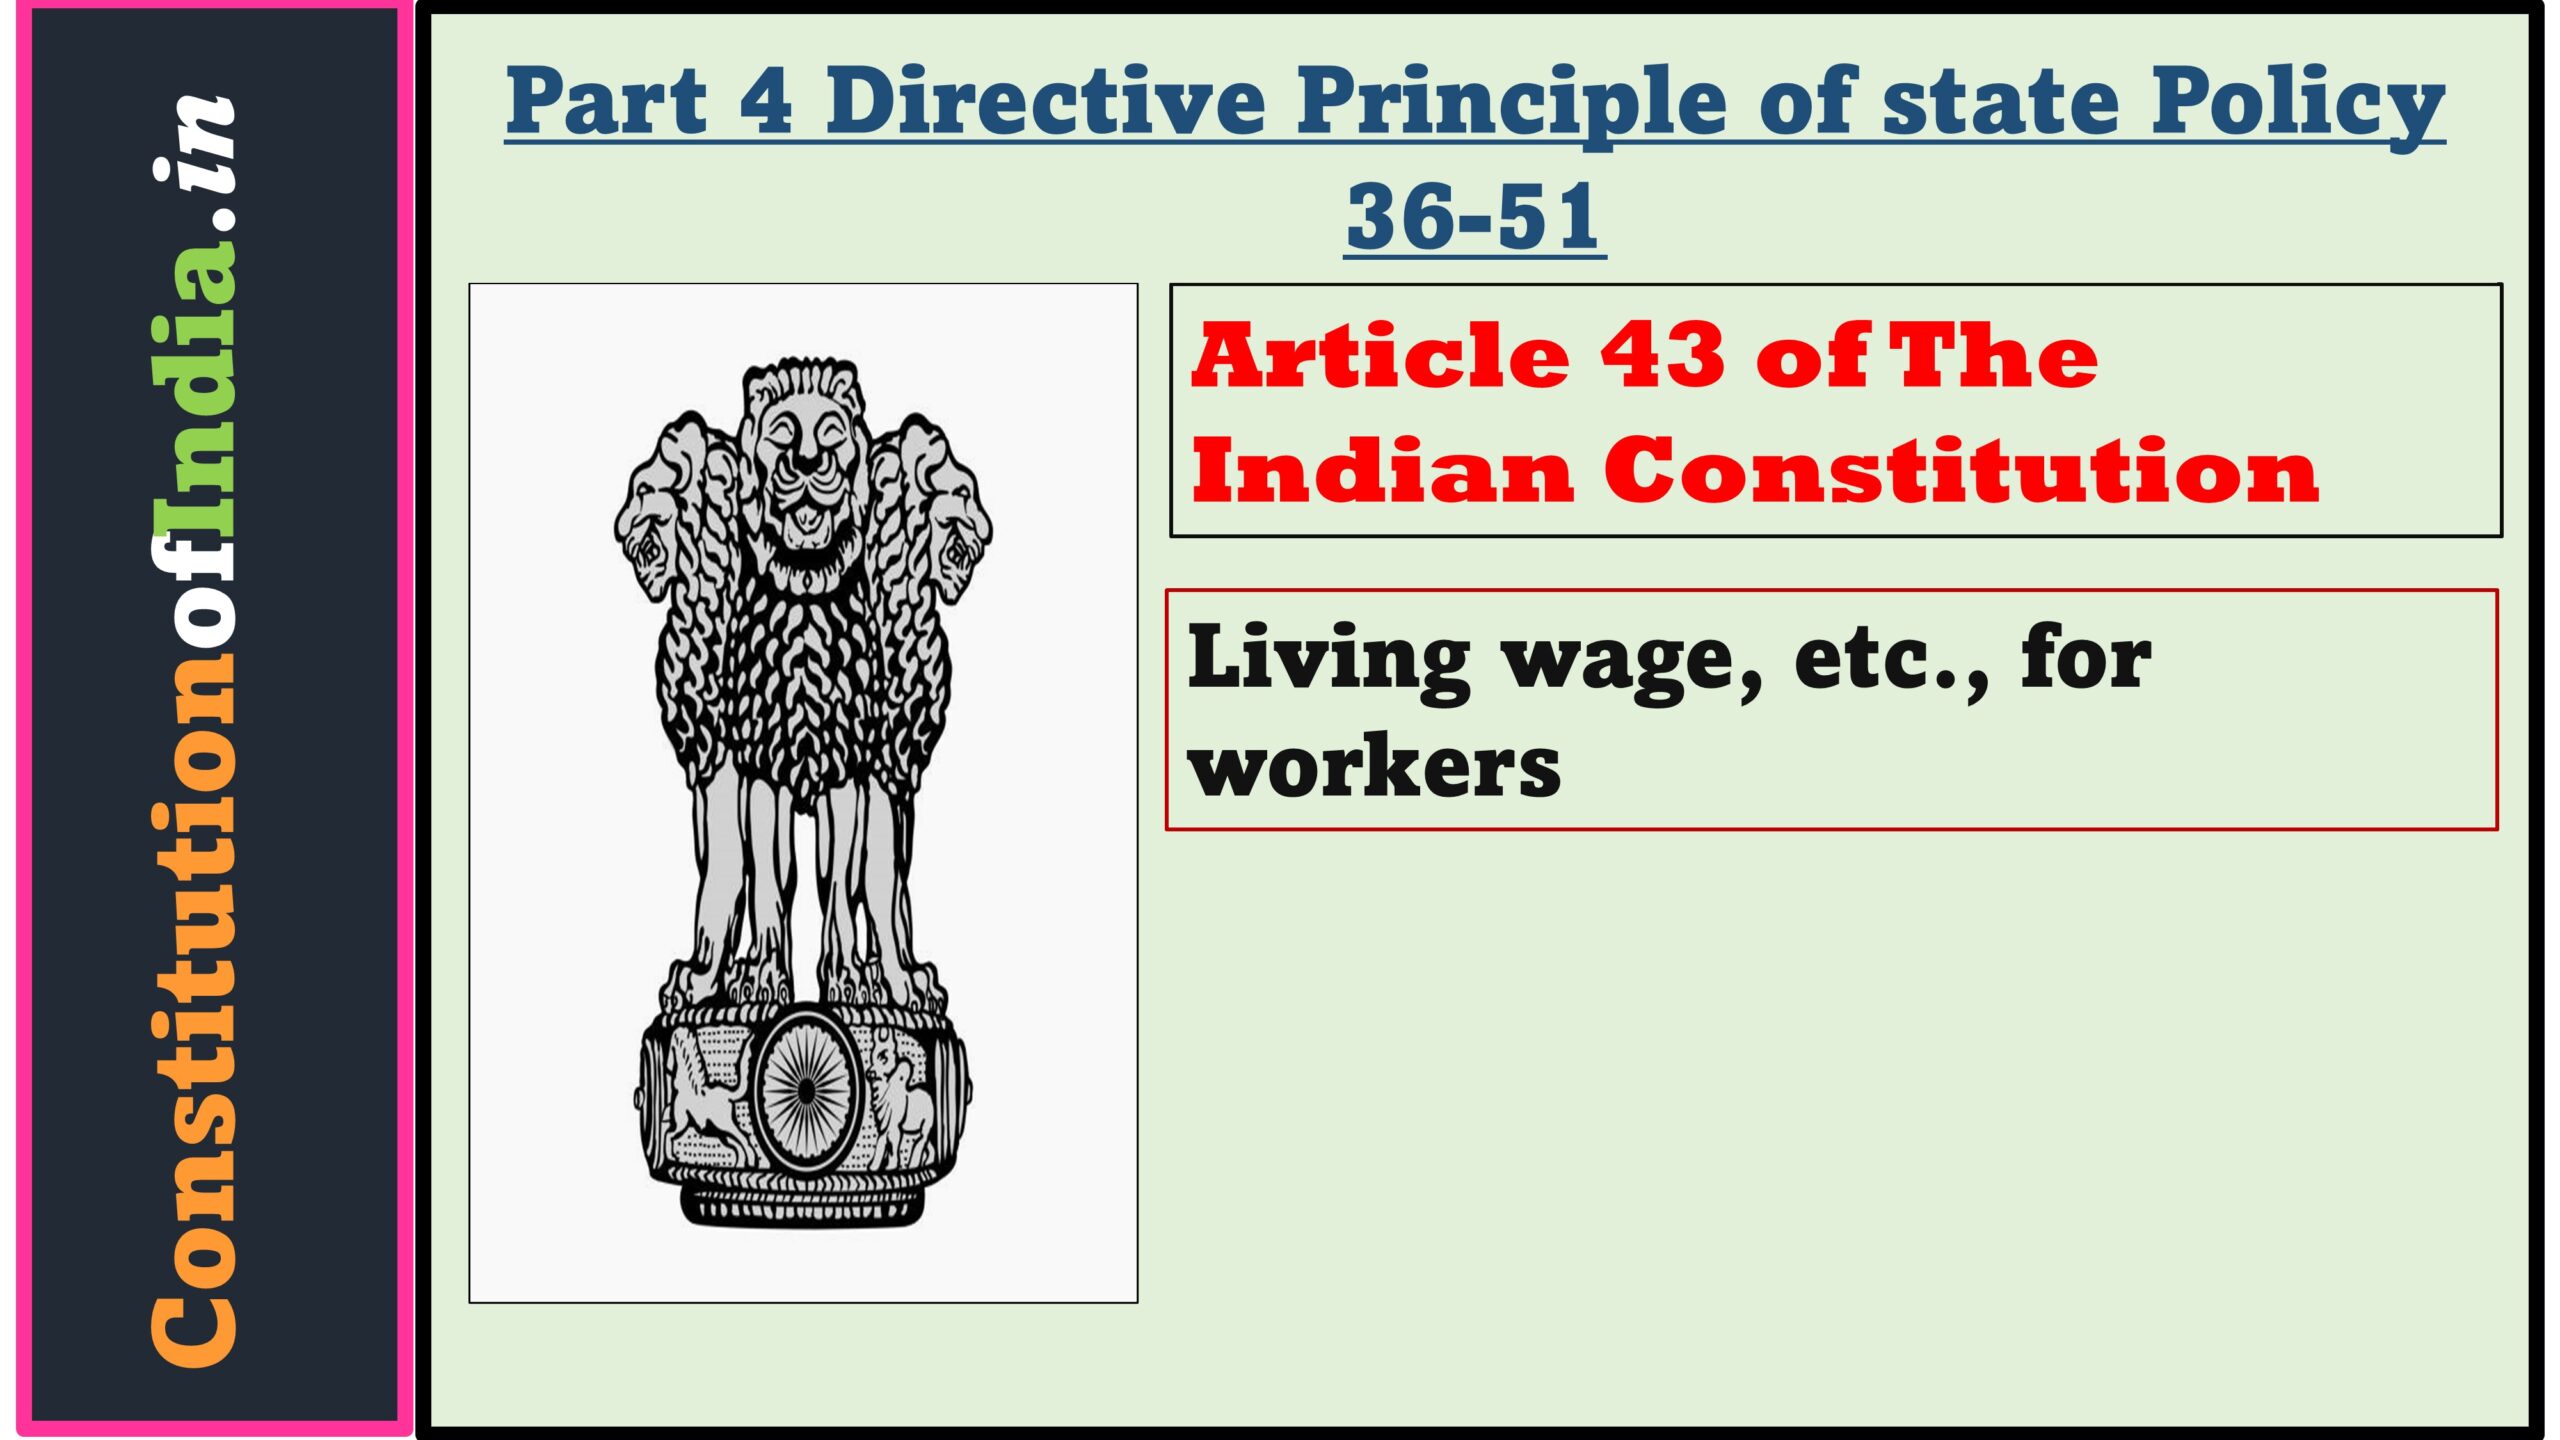 Article 43 of Indian Constitution Living wage, etc., for workers.